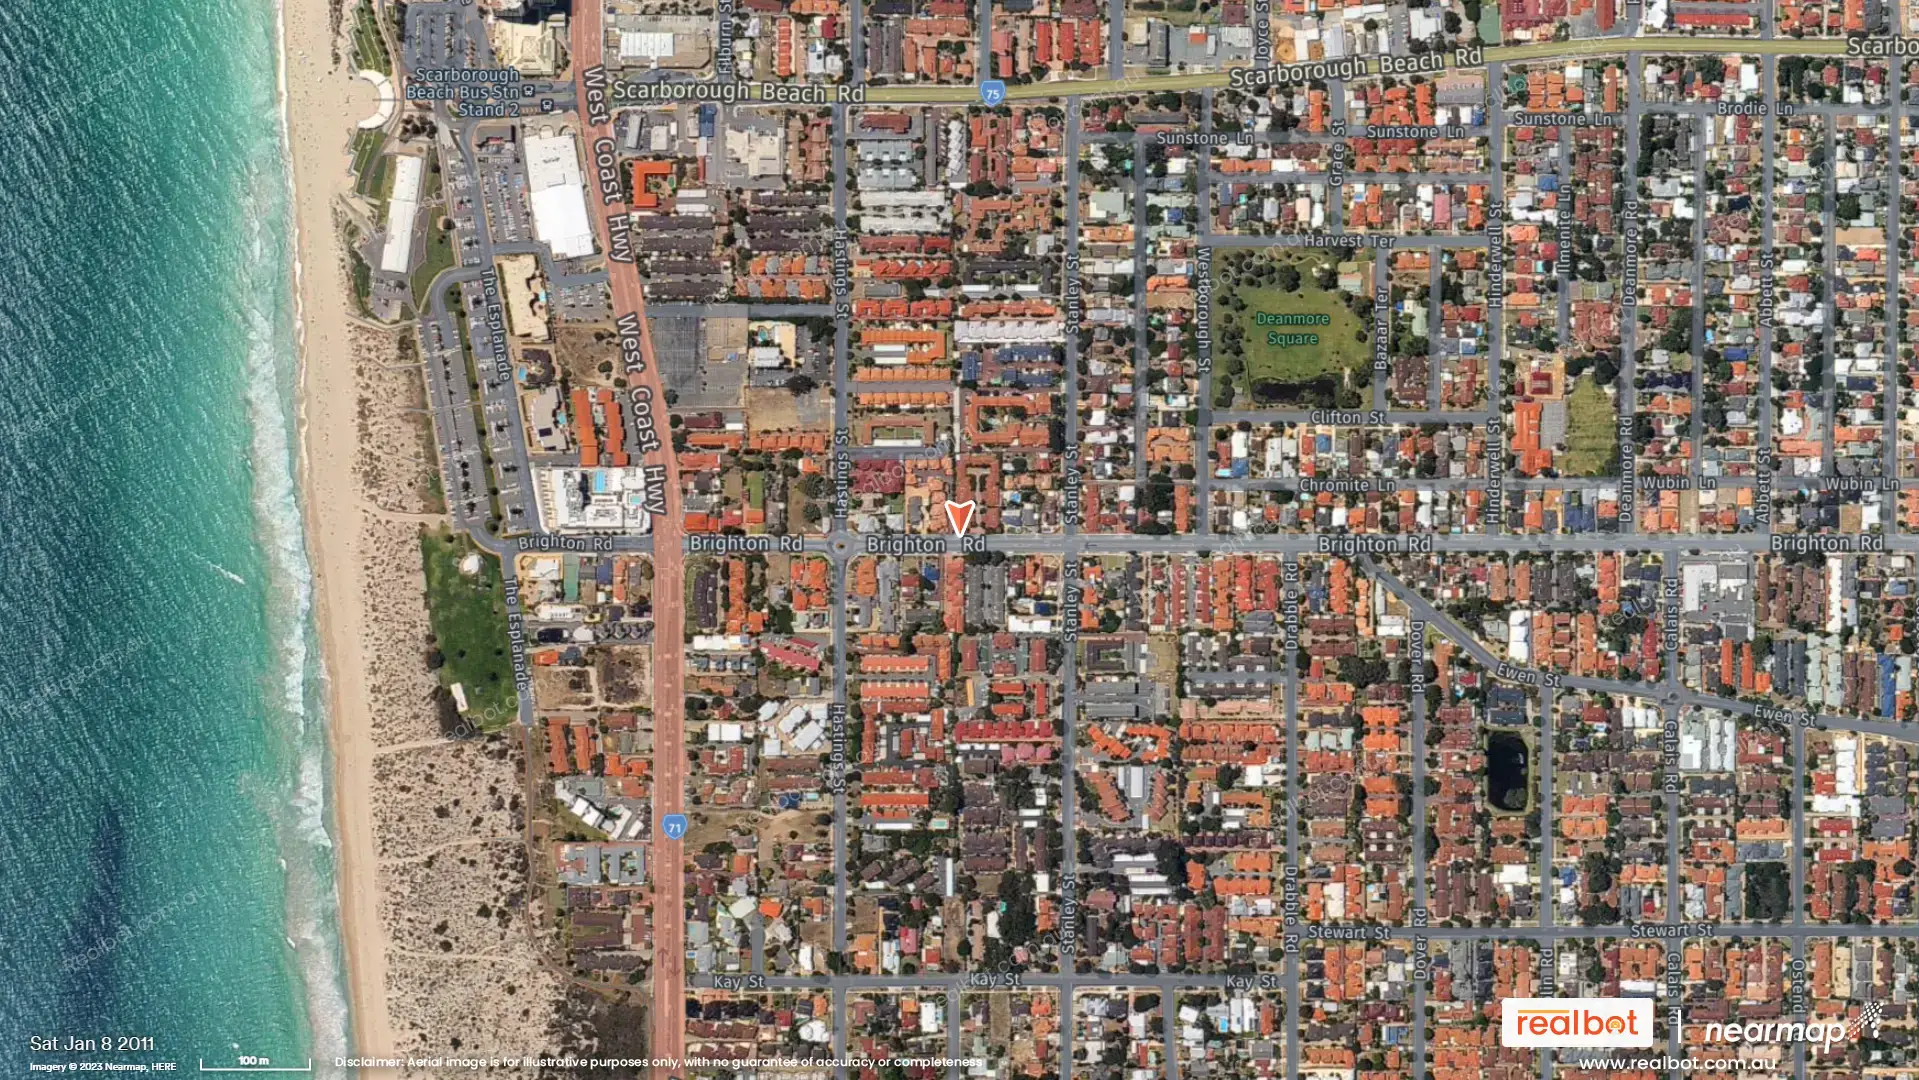 scarborough-wa-6019-Suburb-Profile-And-Aerial-Images-Real-Search